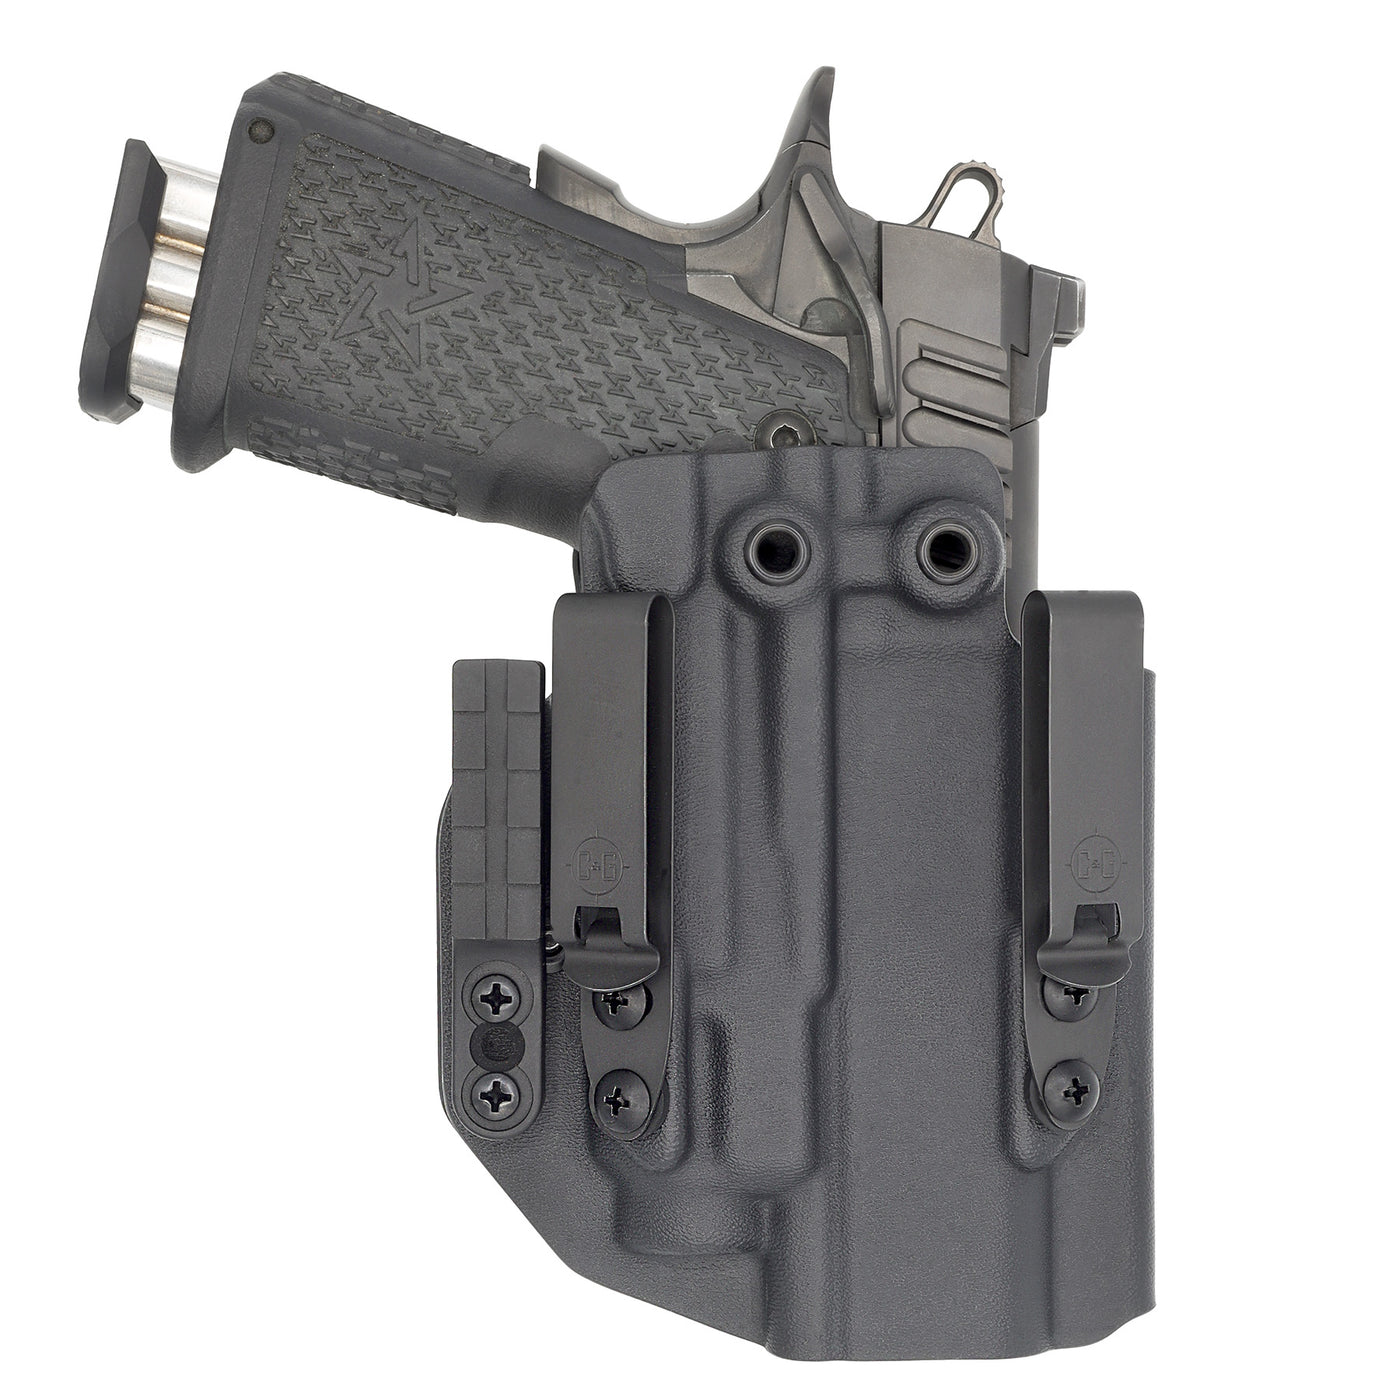 C&G Holsters Quickship IWB ALPHA UPGRADE Tactical 1911 Streamlight TLR7/a in holstered position